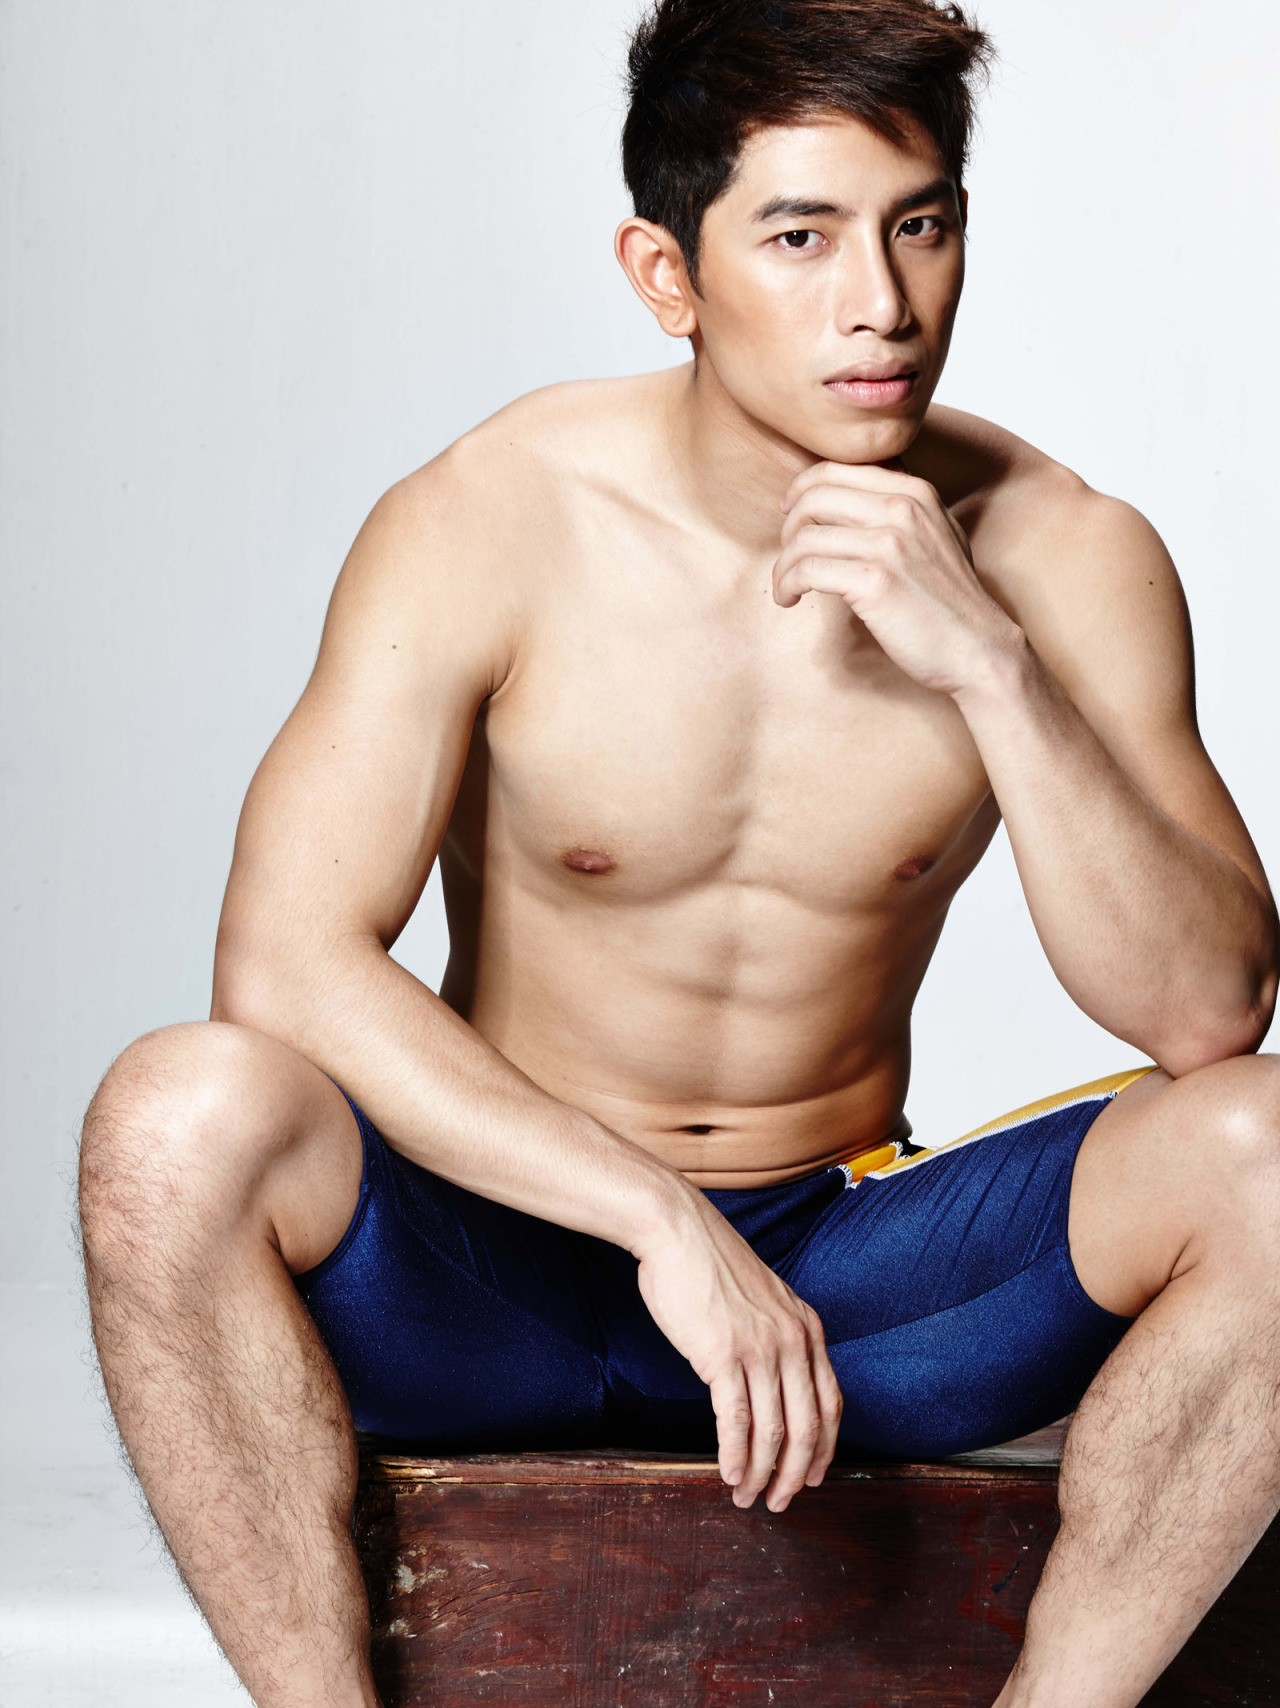 hunkxtwink:Thai Model - Channarong TakhamHunkxtwink - More in my archive